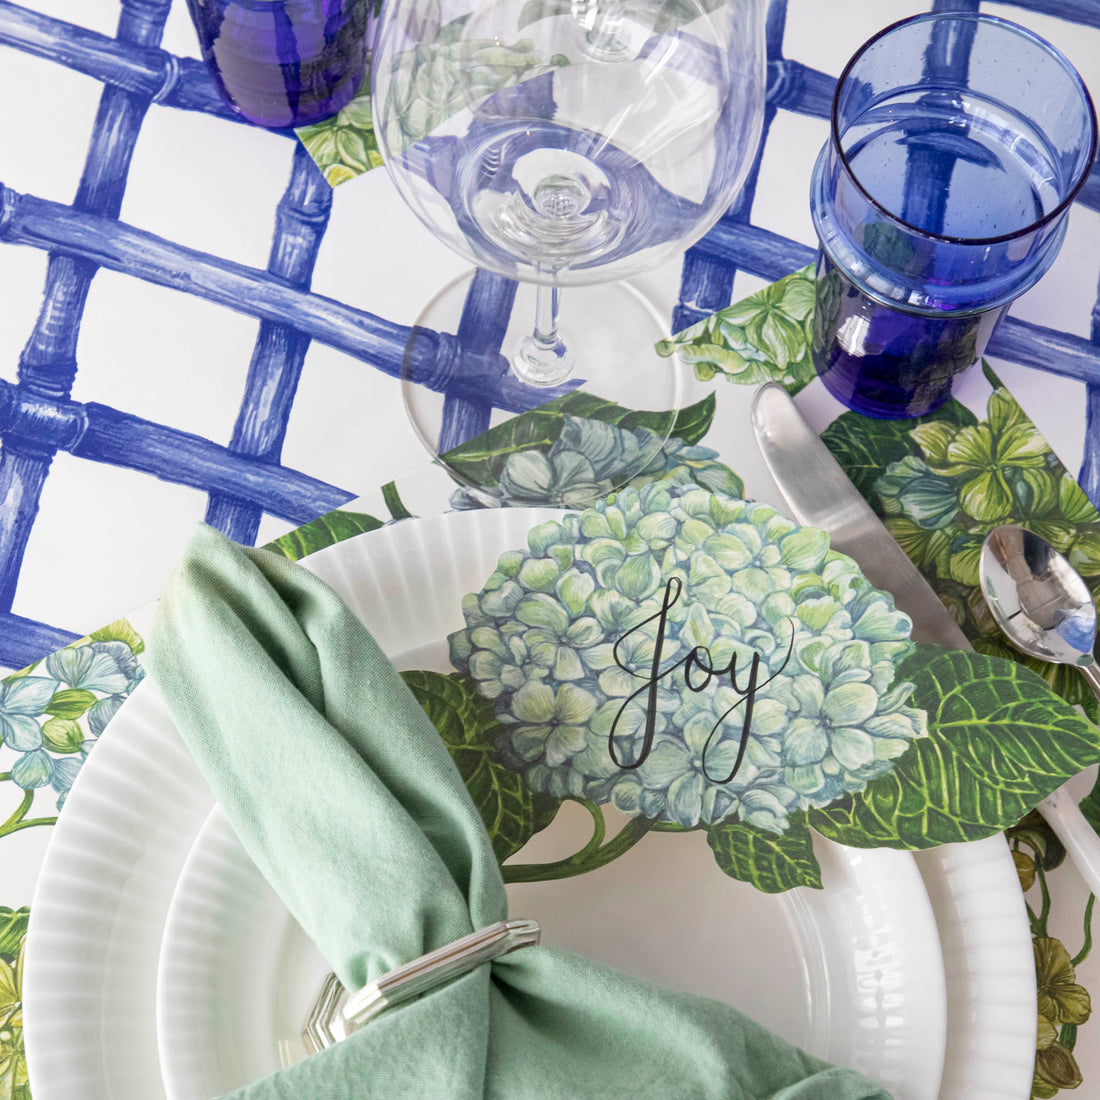 A Hydrangea Table Accent with &quot;Joy&quot; written on it in beautiful script resting on the plate of an elegant place setting.